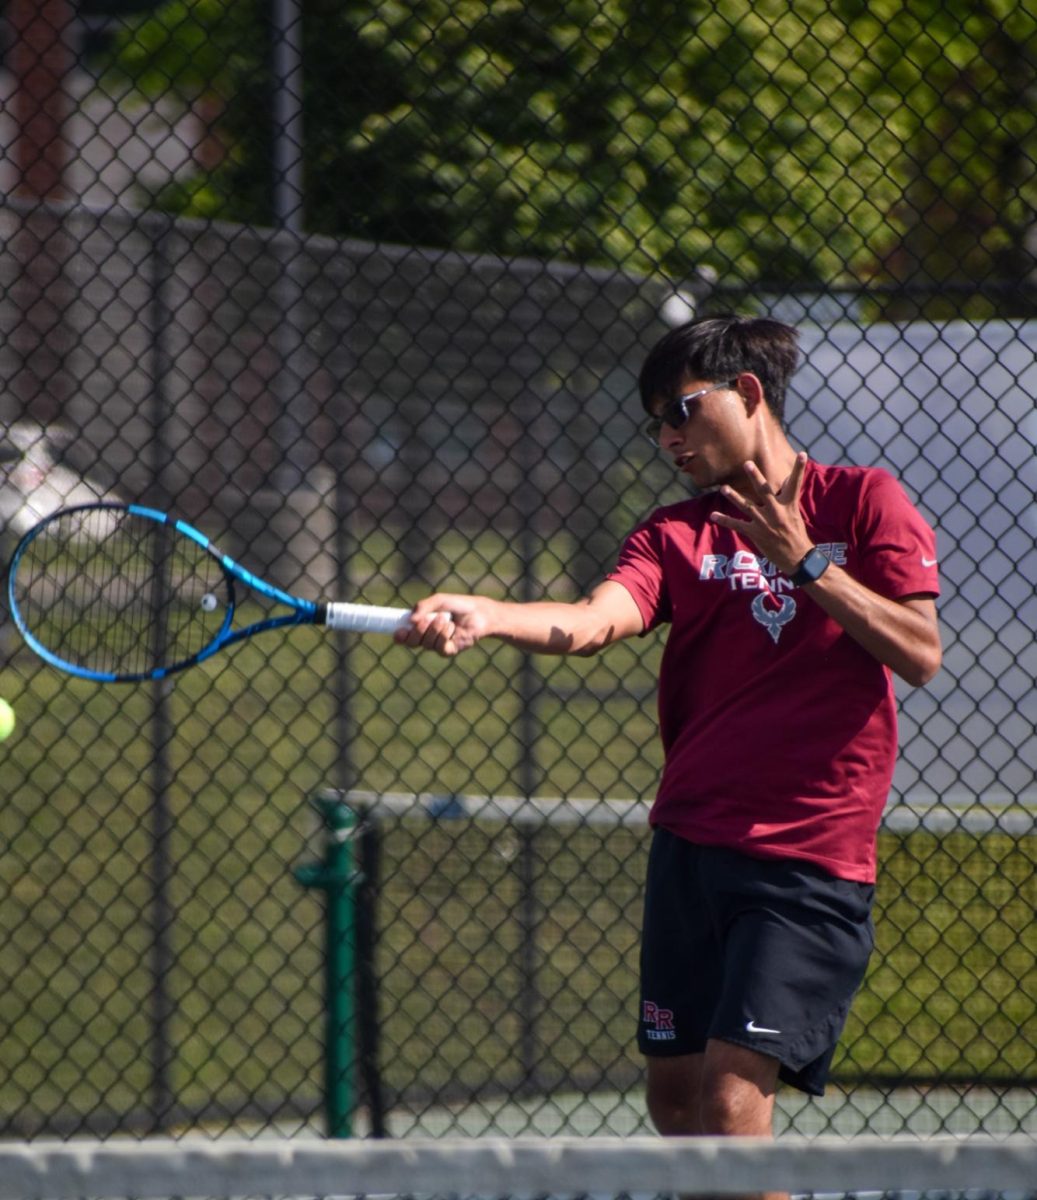 With his eyes on the ball, senior Aryan Dhiman swings his racket hard in order to get an advantage over his opponent.